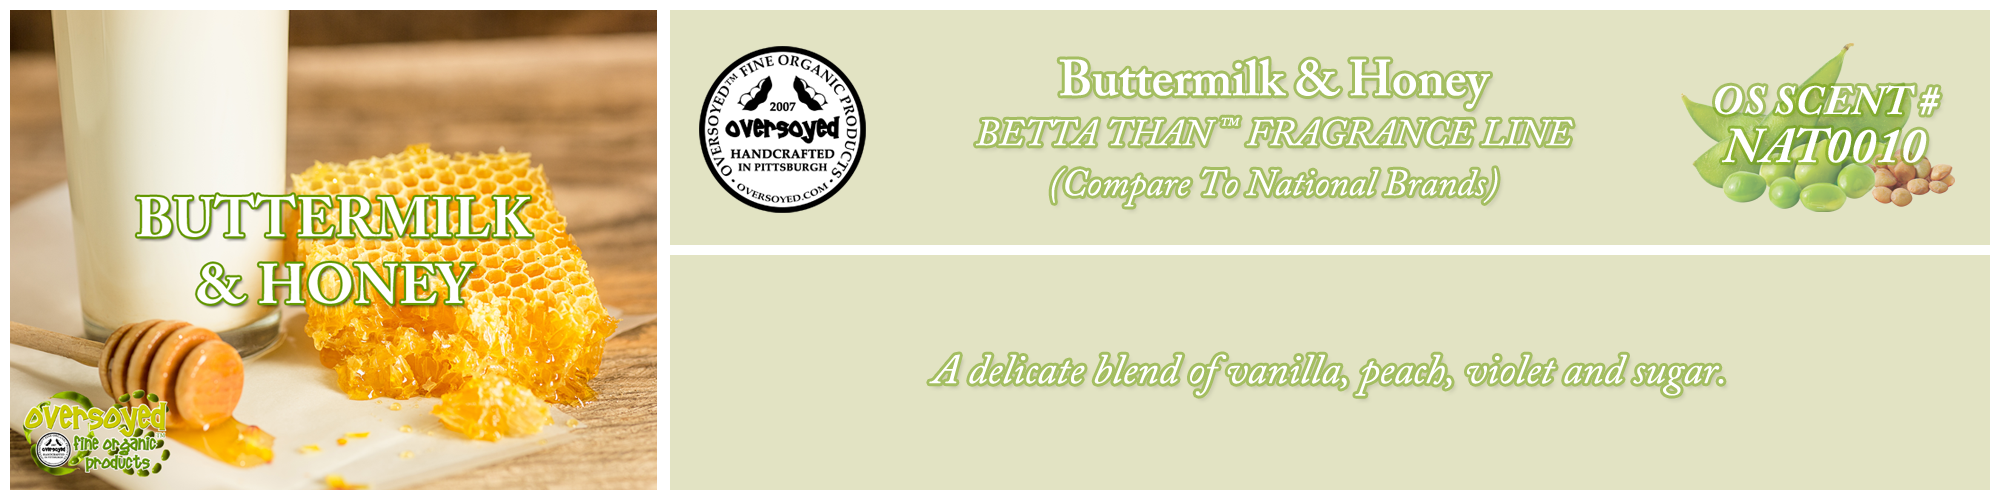 Buttermilk & Honey Handcrafted Products Collection